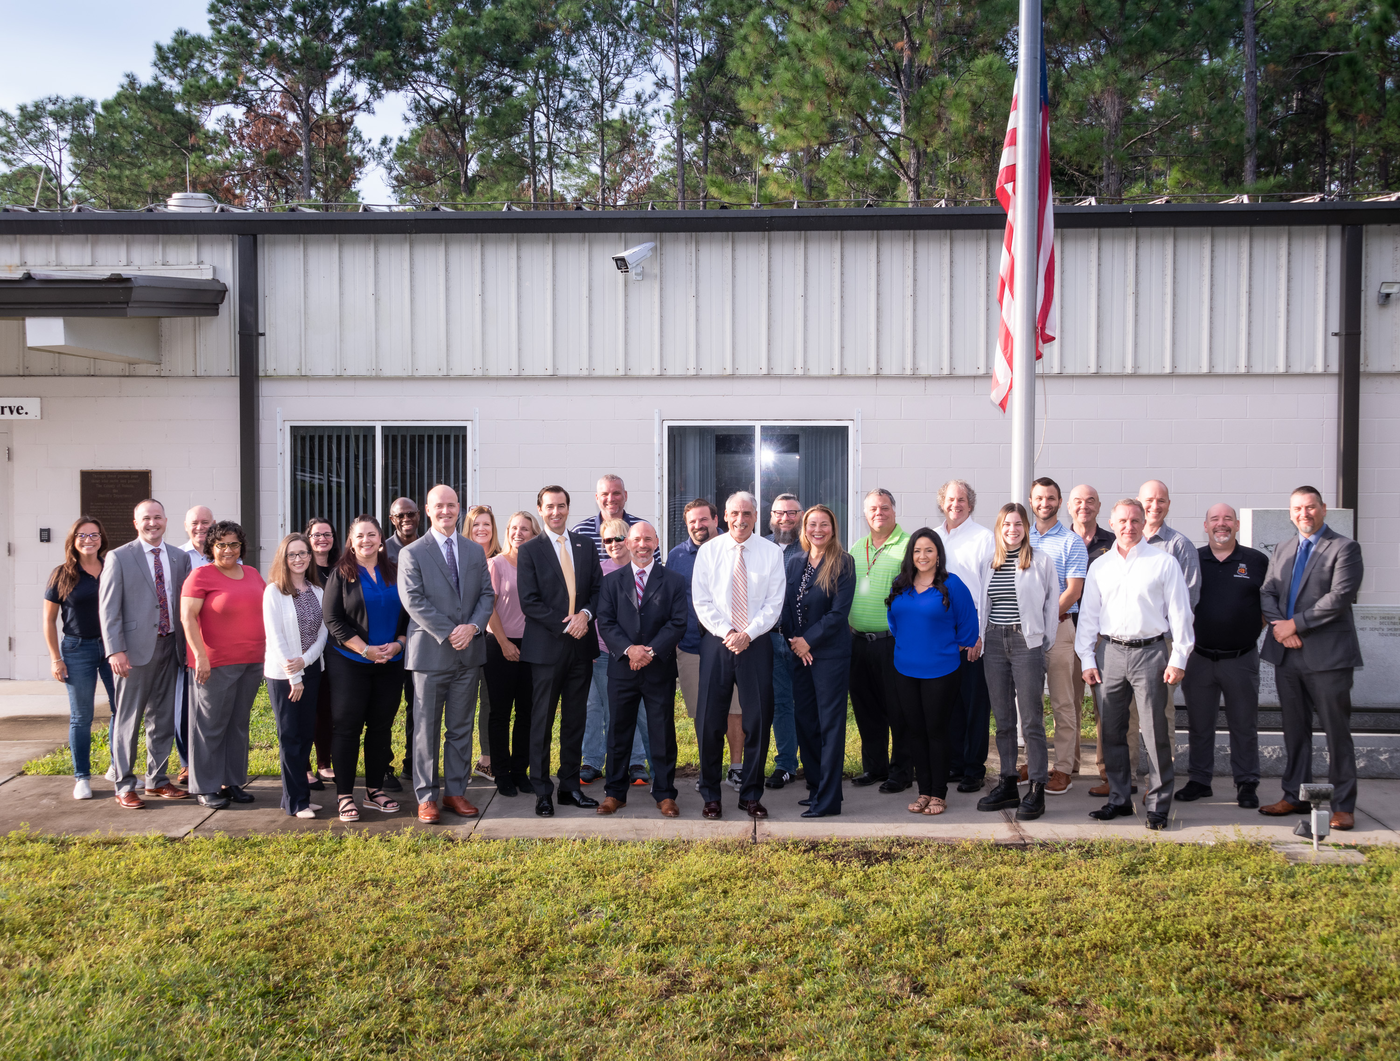 FBI Jacksonville’s Daytona Beach Citizens Academy class photo with FBI Jacksonville’s Special Agent in Charge Rachel Rojas and Volusia Sheriff’s Office Sheriff Michael Chitwood.